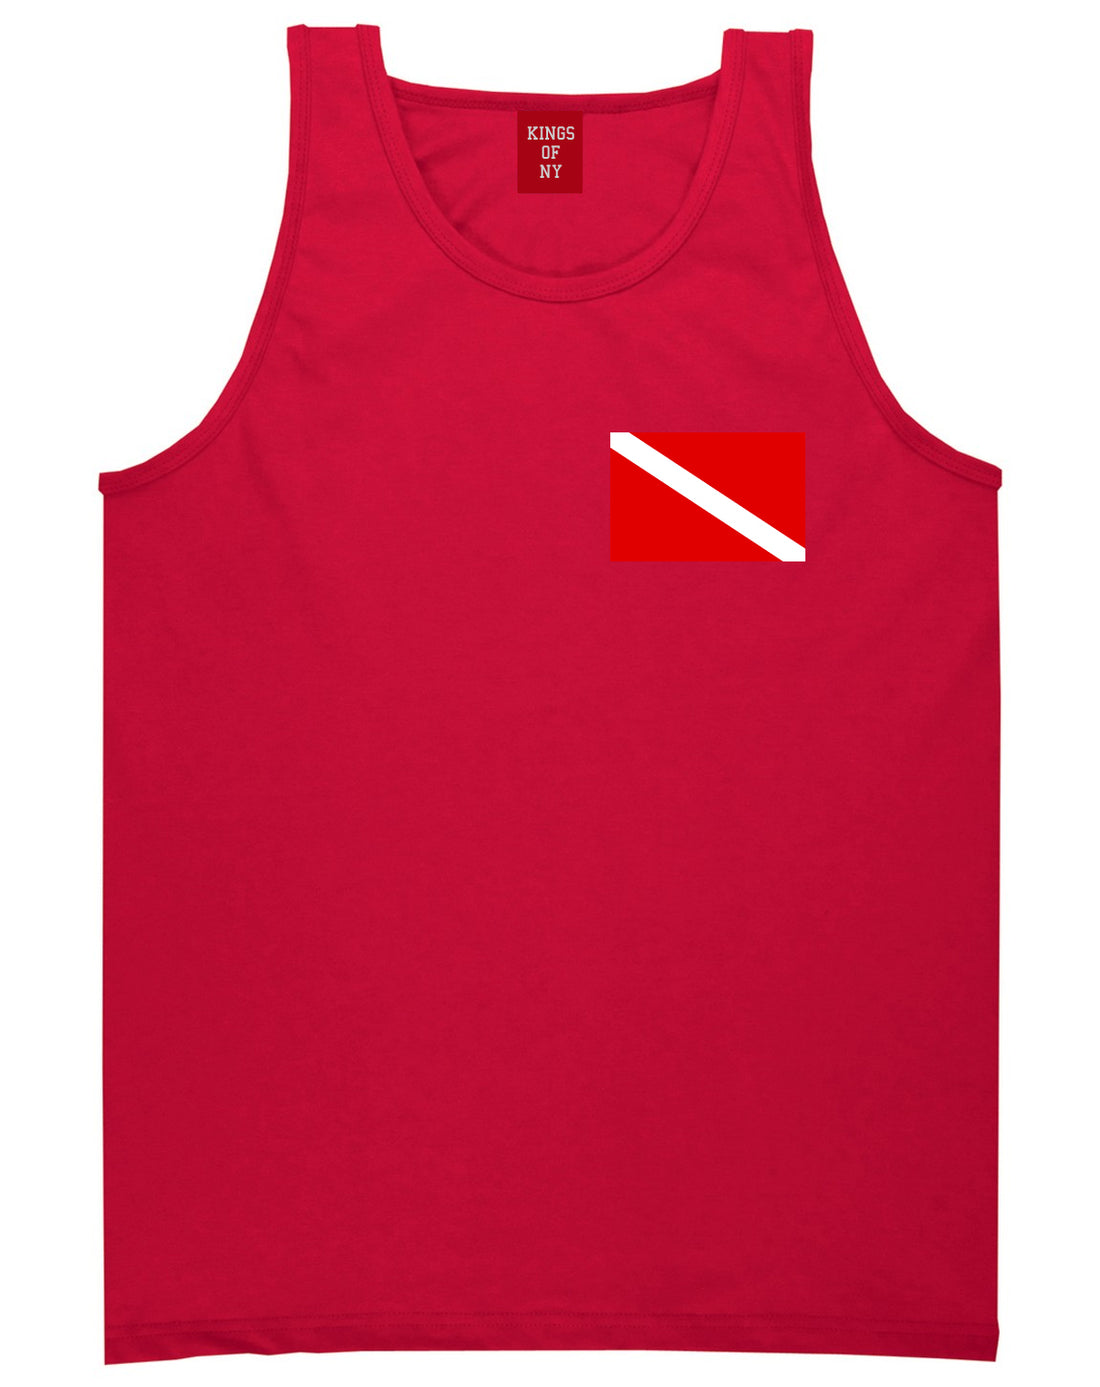 Scuba_Dive_Flag_Chest Mens Red Tank Top Shirt by Kings Of NY